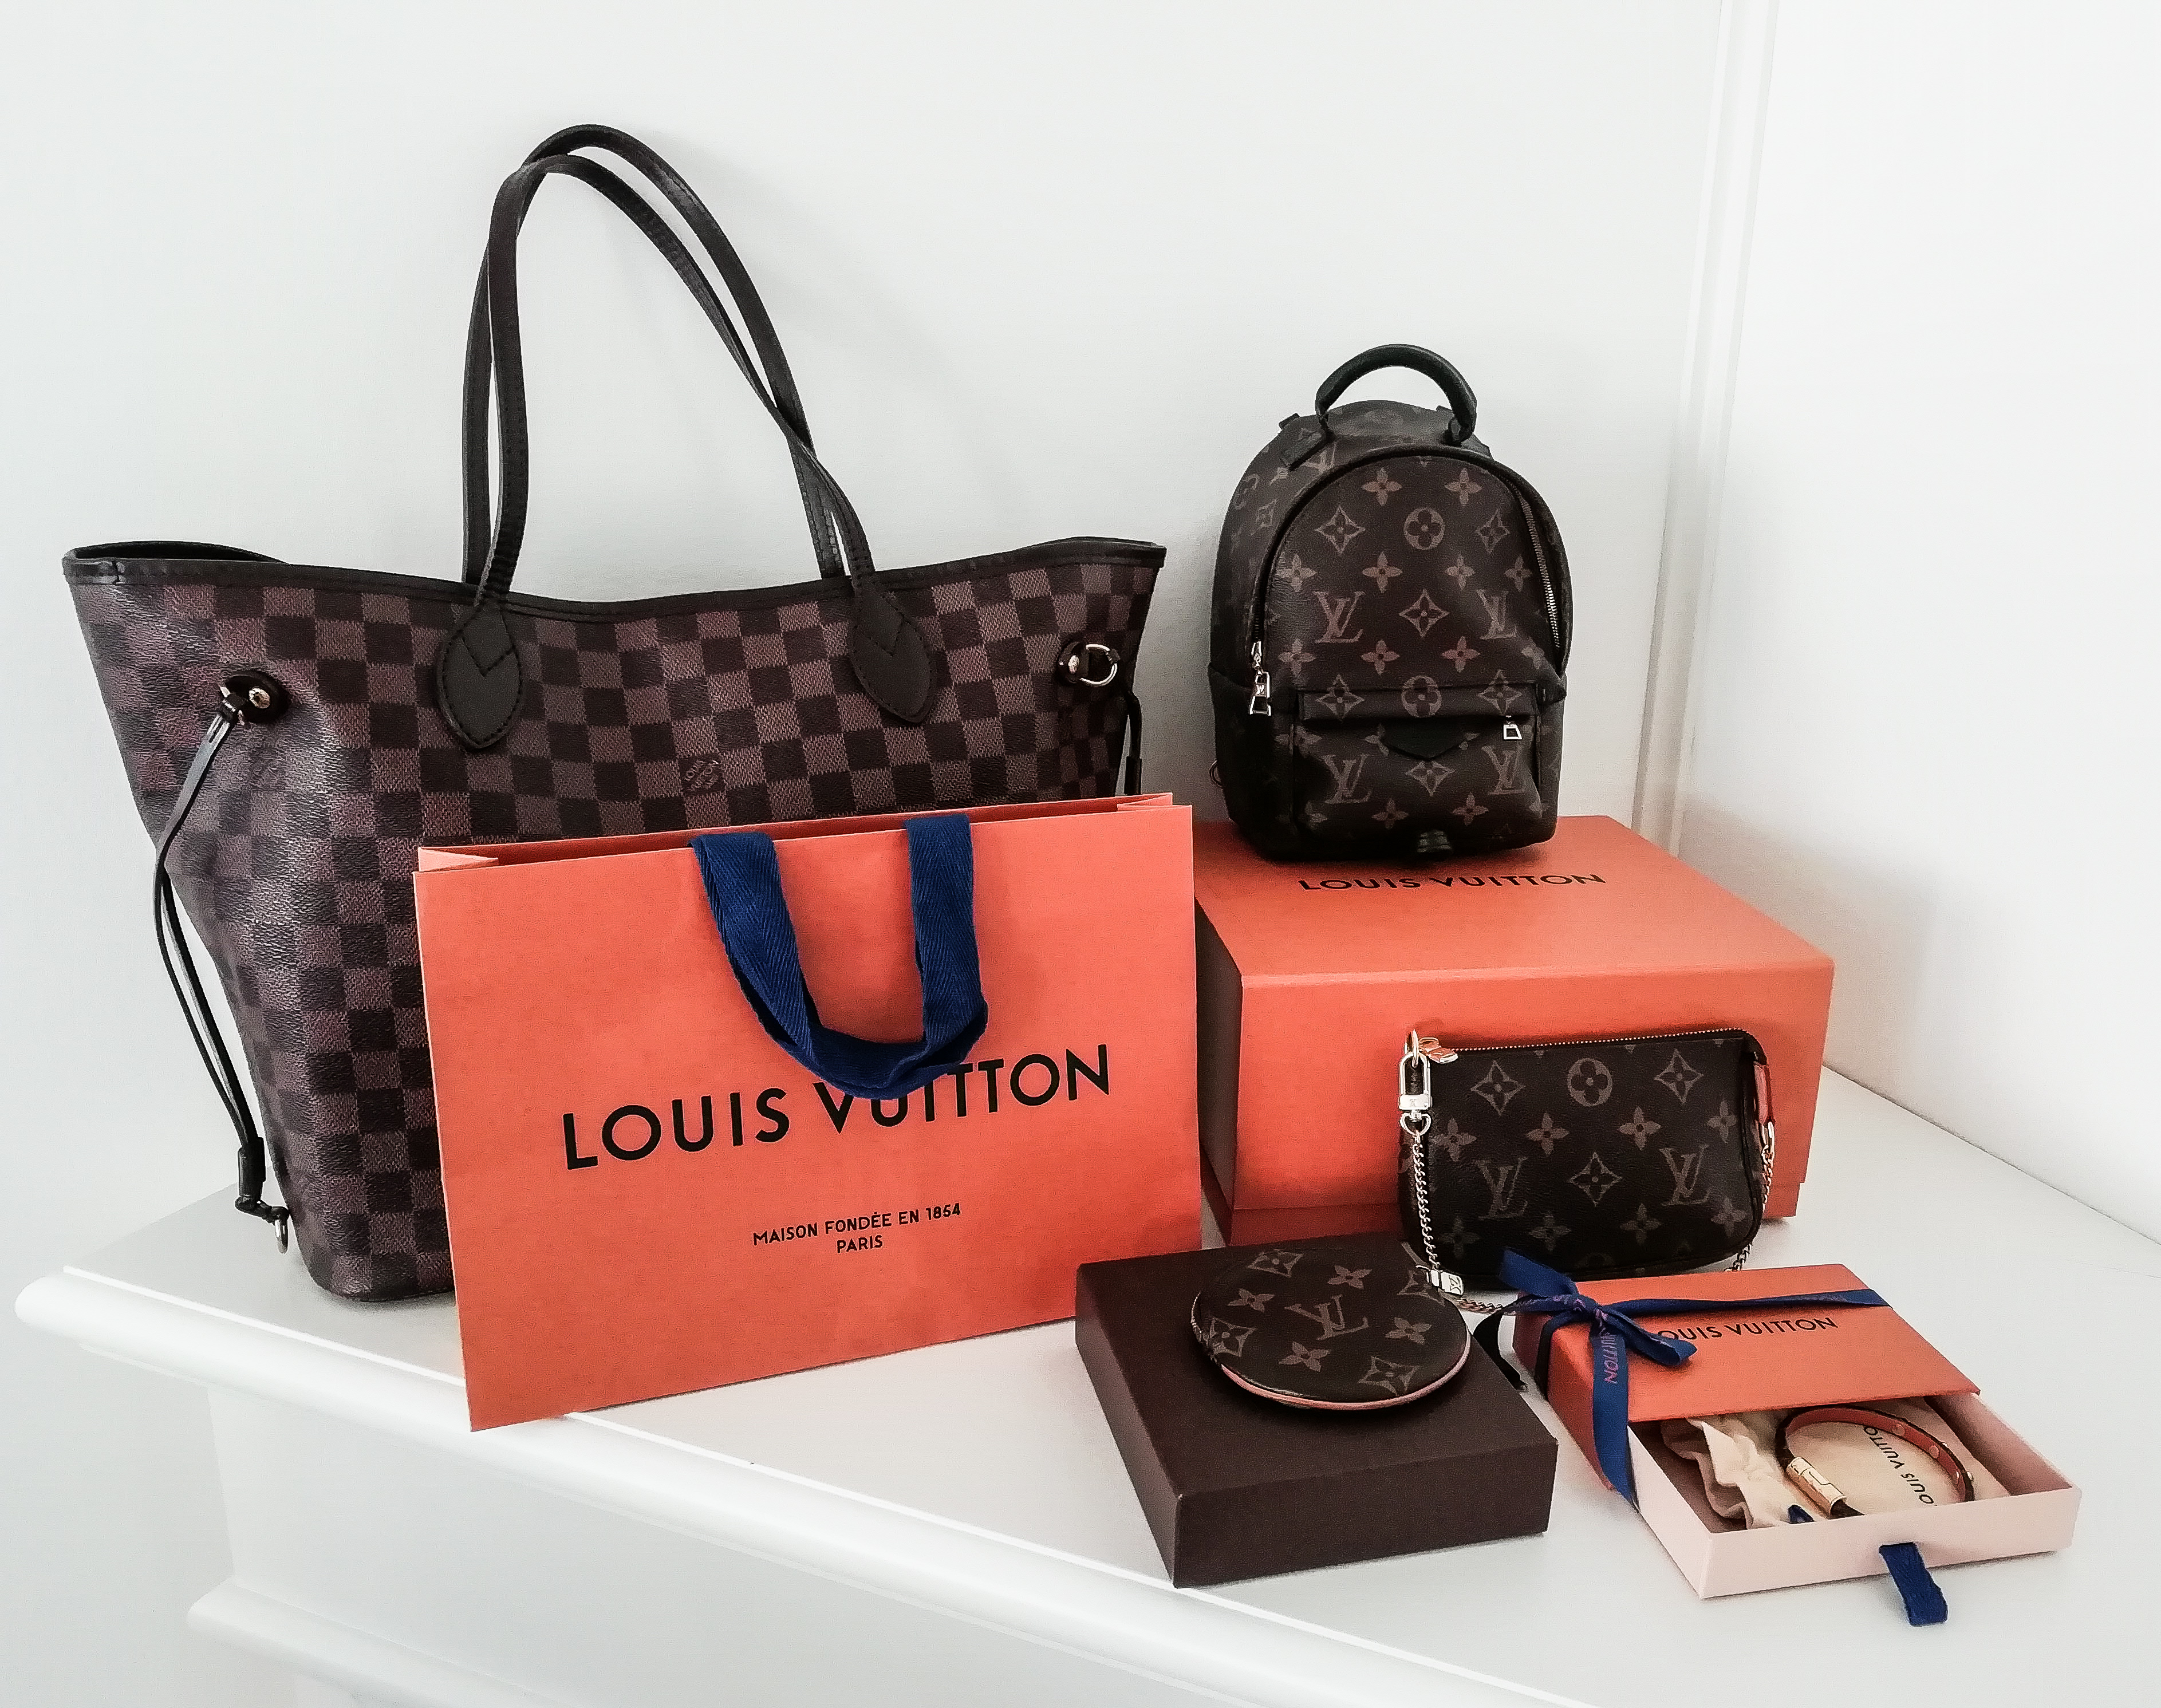 Is Louis Vuitton discontinuing canvas bags..? – Buy the goddamn bag